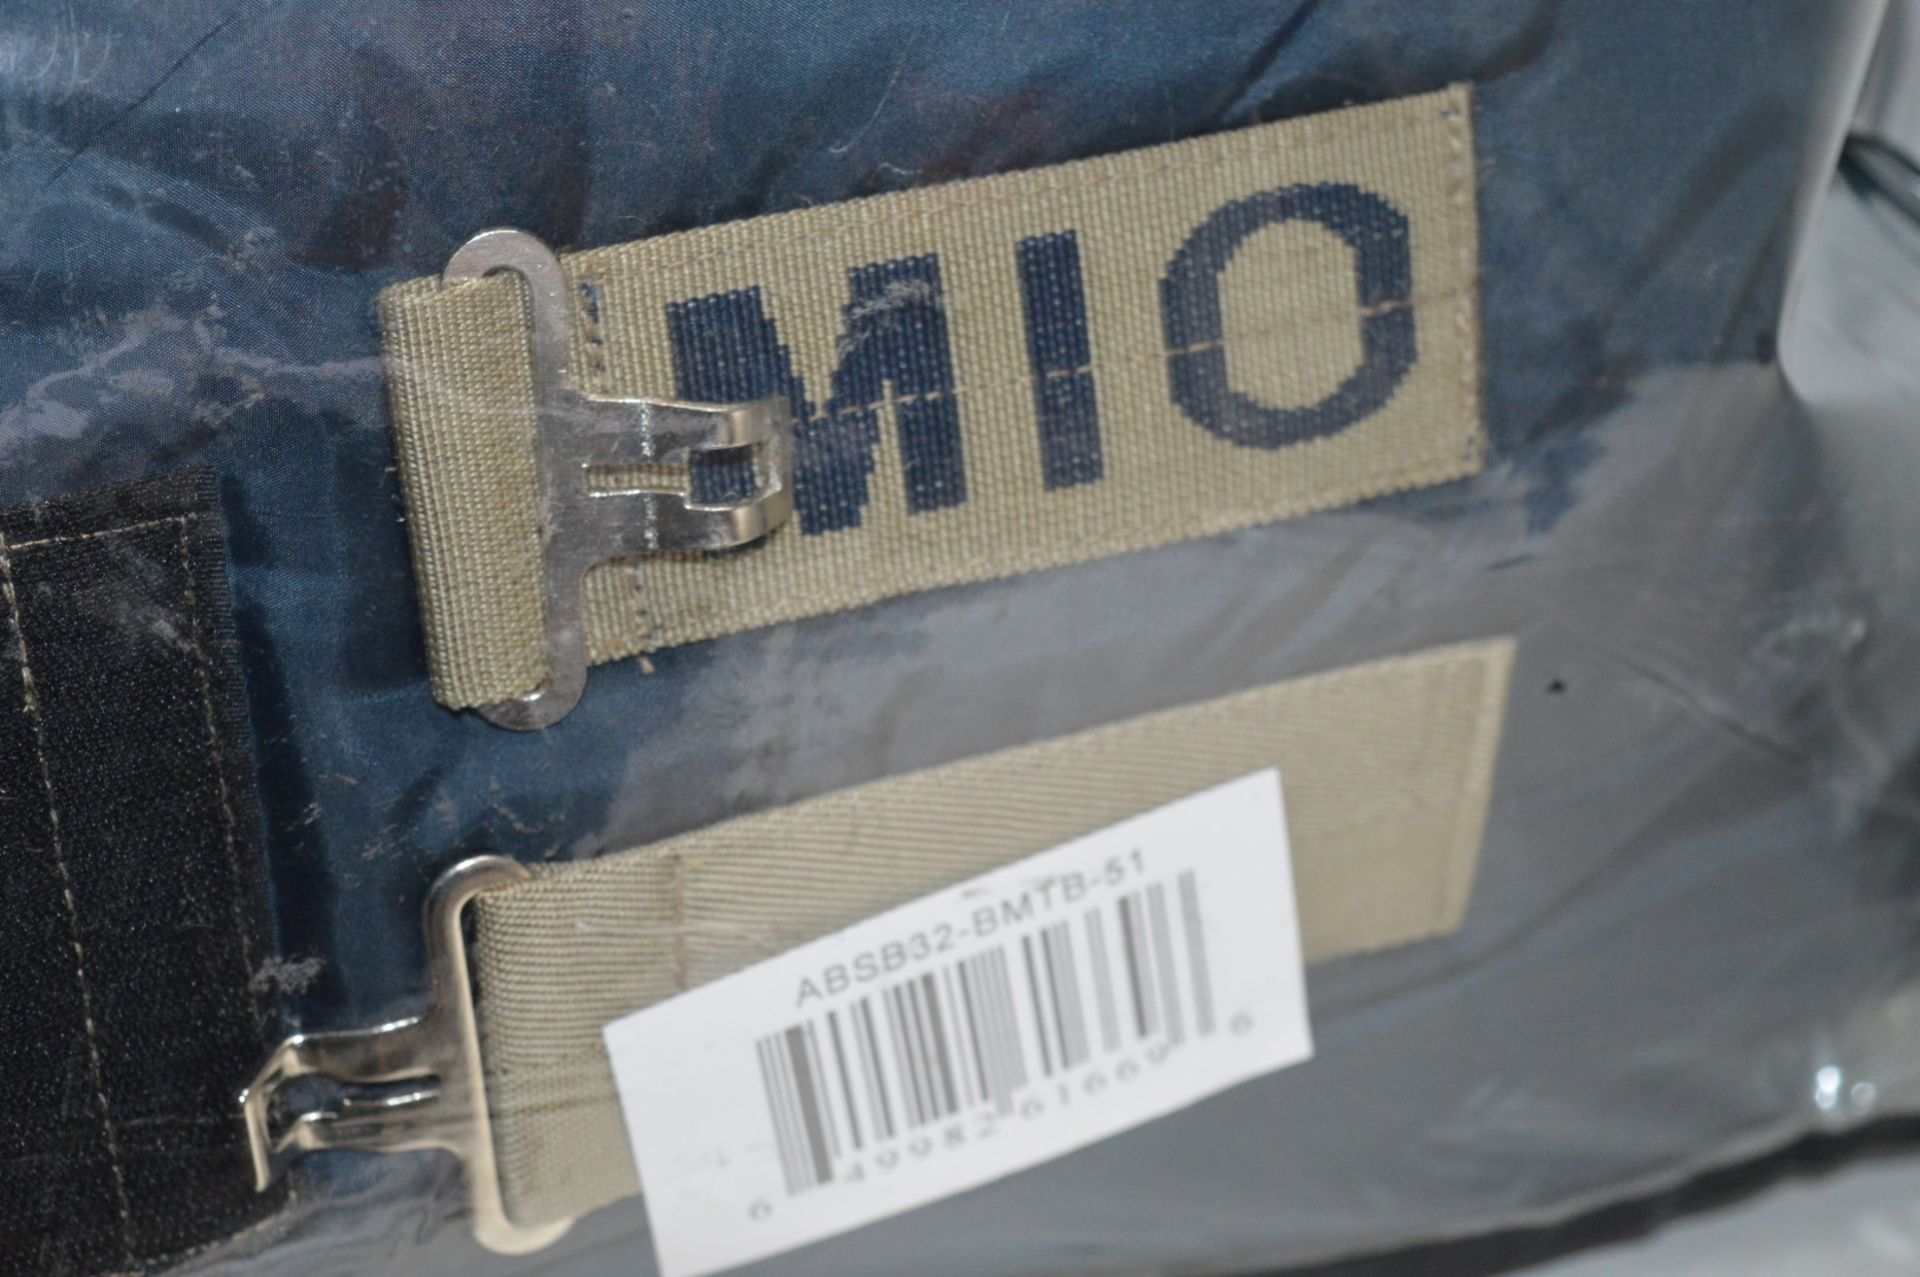 1 x Horseware Mio Insulator - Medium 150g in Navy - Size UK 51 - Product Code ABSB32-BMTB-51 - New - Image 5 of 5